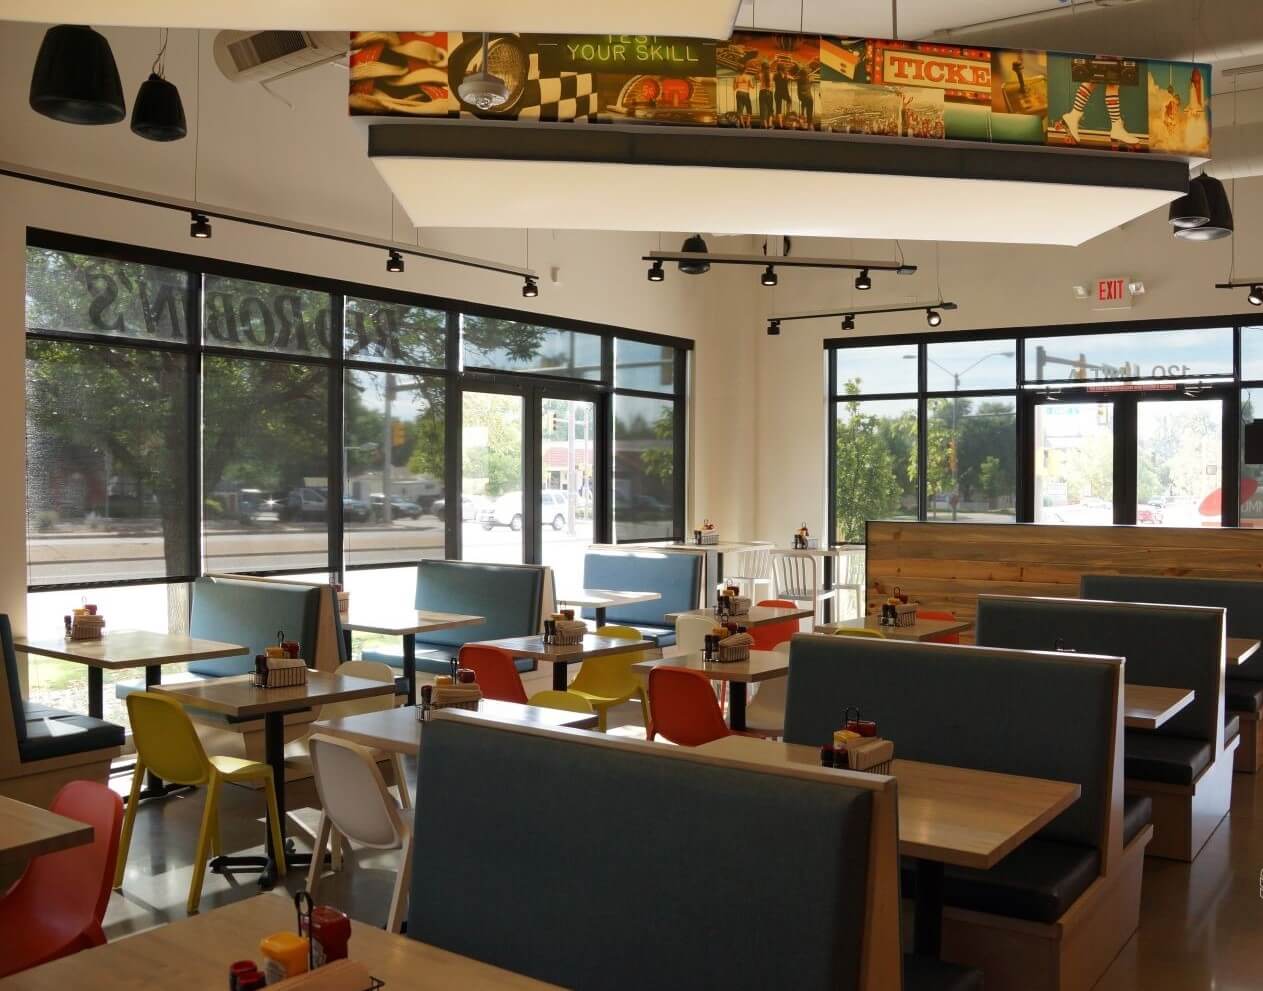 Commercial window Treatments for restaurants should fit the style and personality of the establishment. 